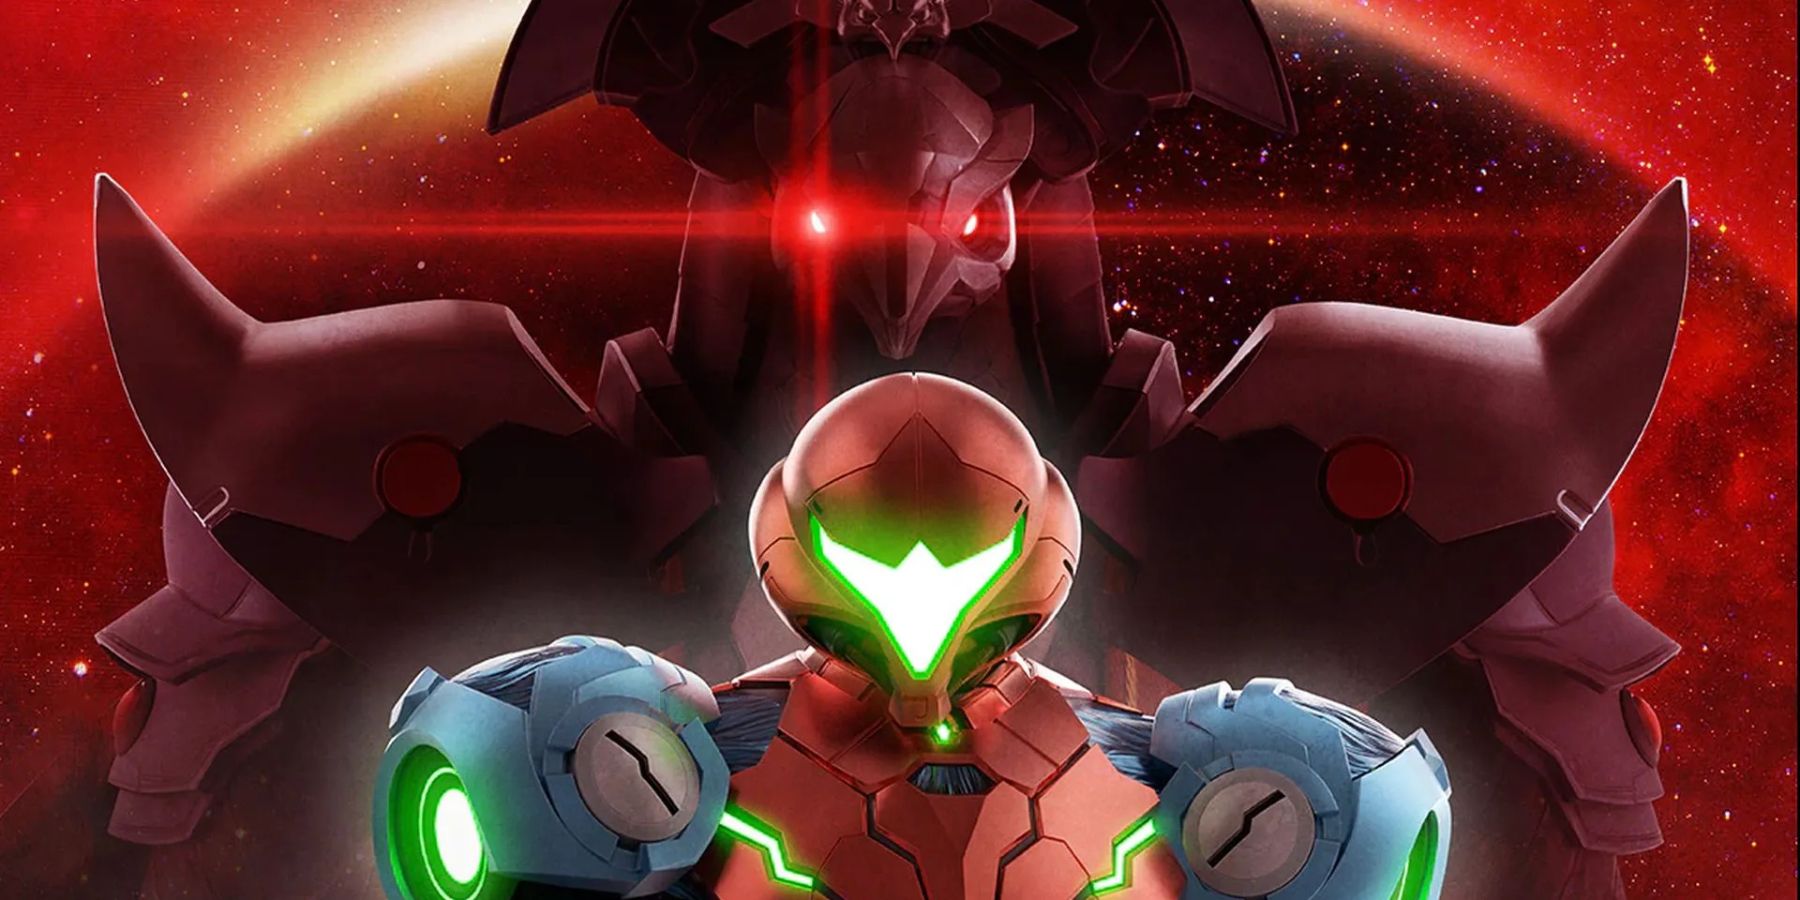 Metroid Dread reveals that Samus actually received two strains of Chozo DNA, one from Raven Beak